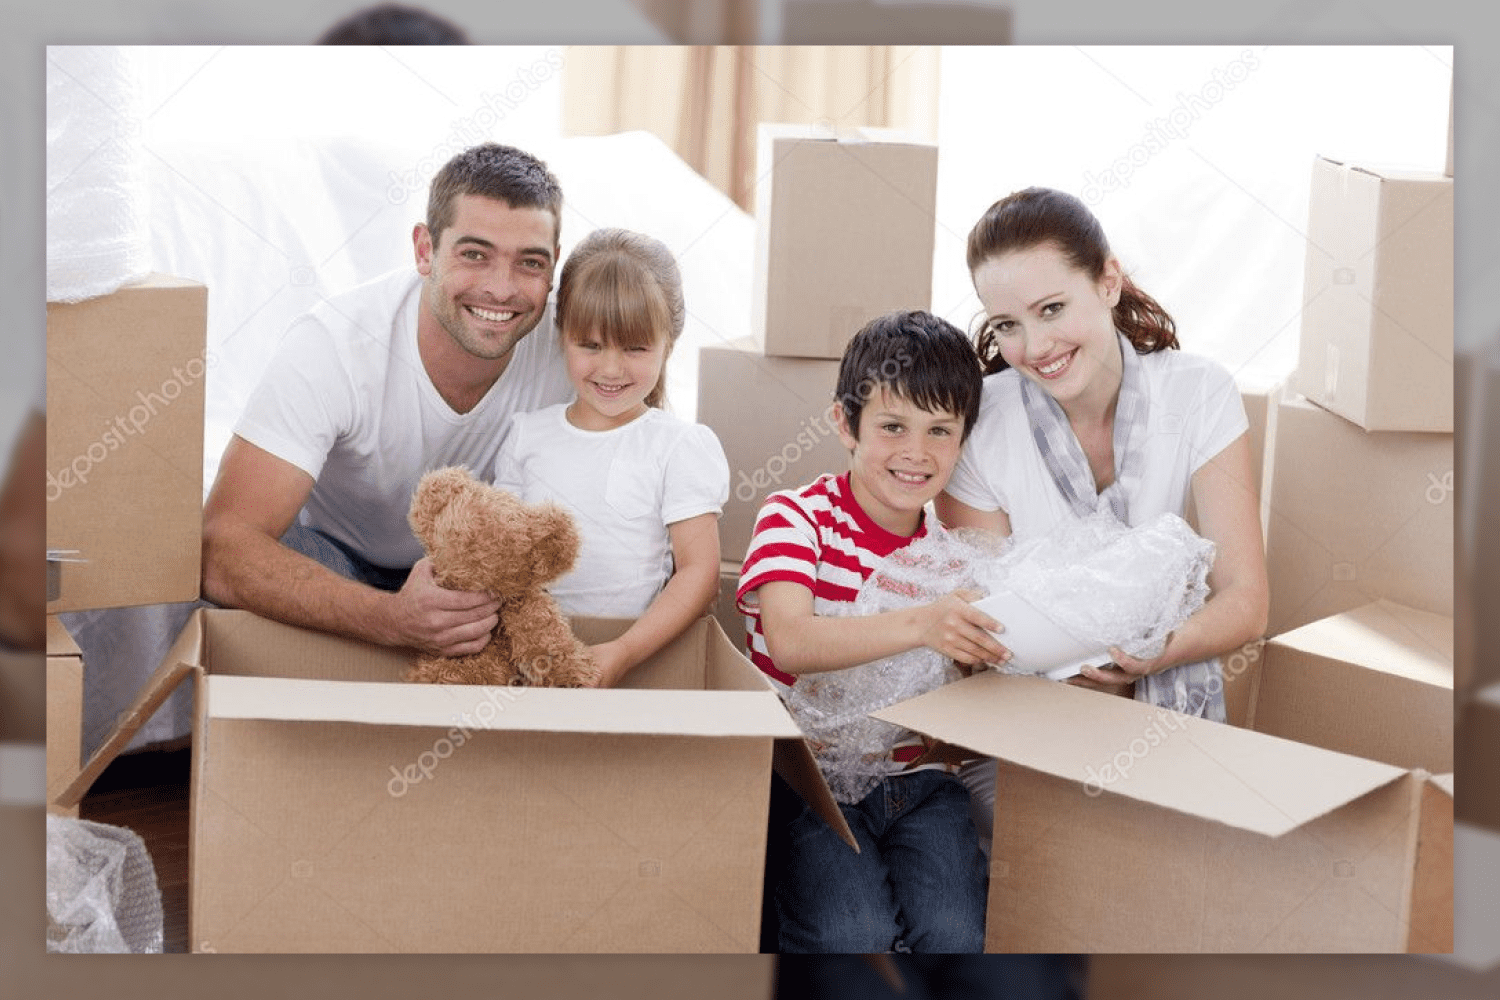 16 young family with kids moving home with boxes around 690